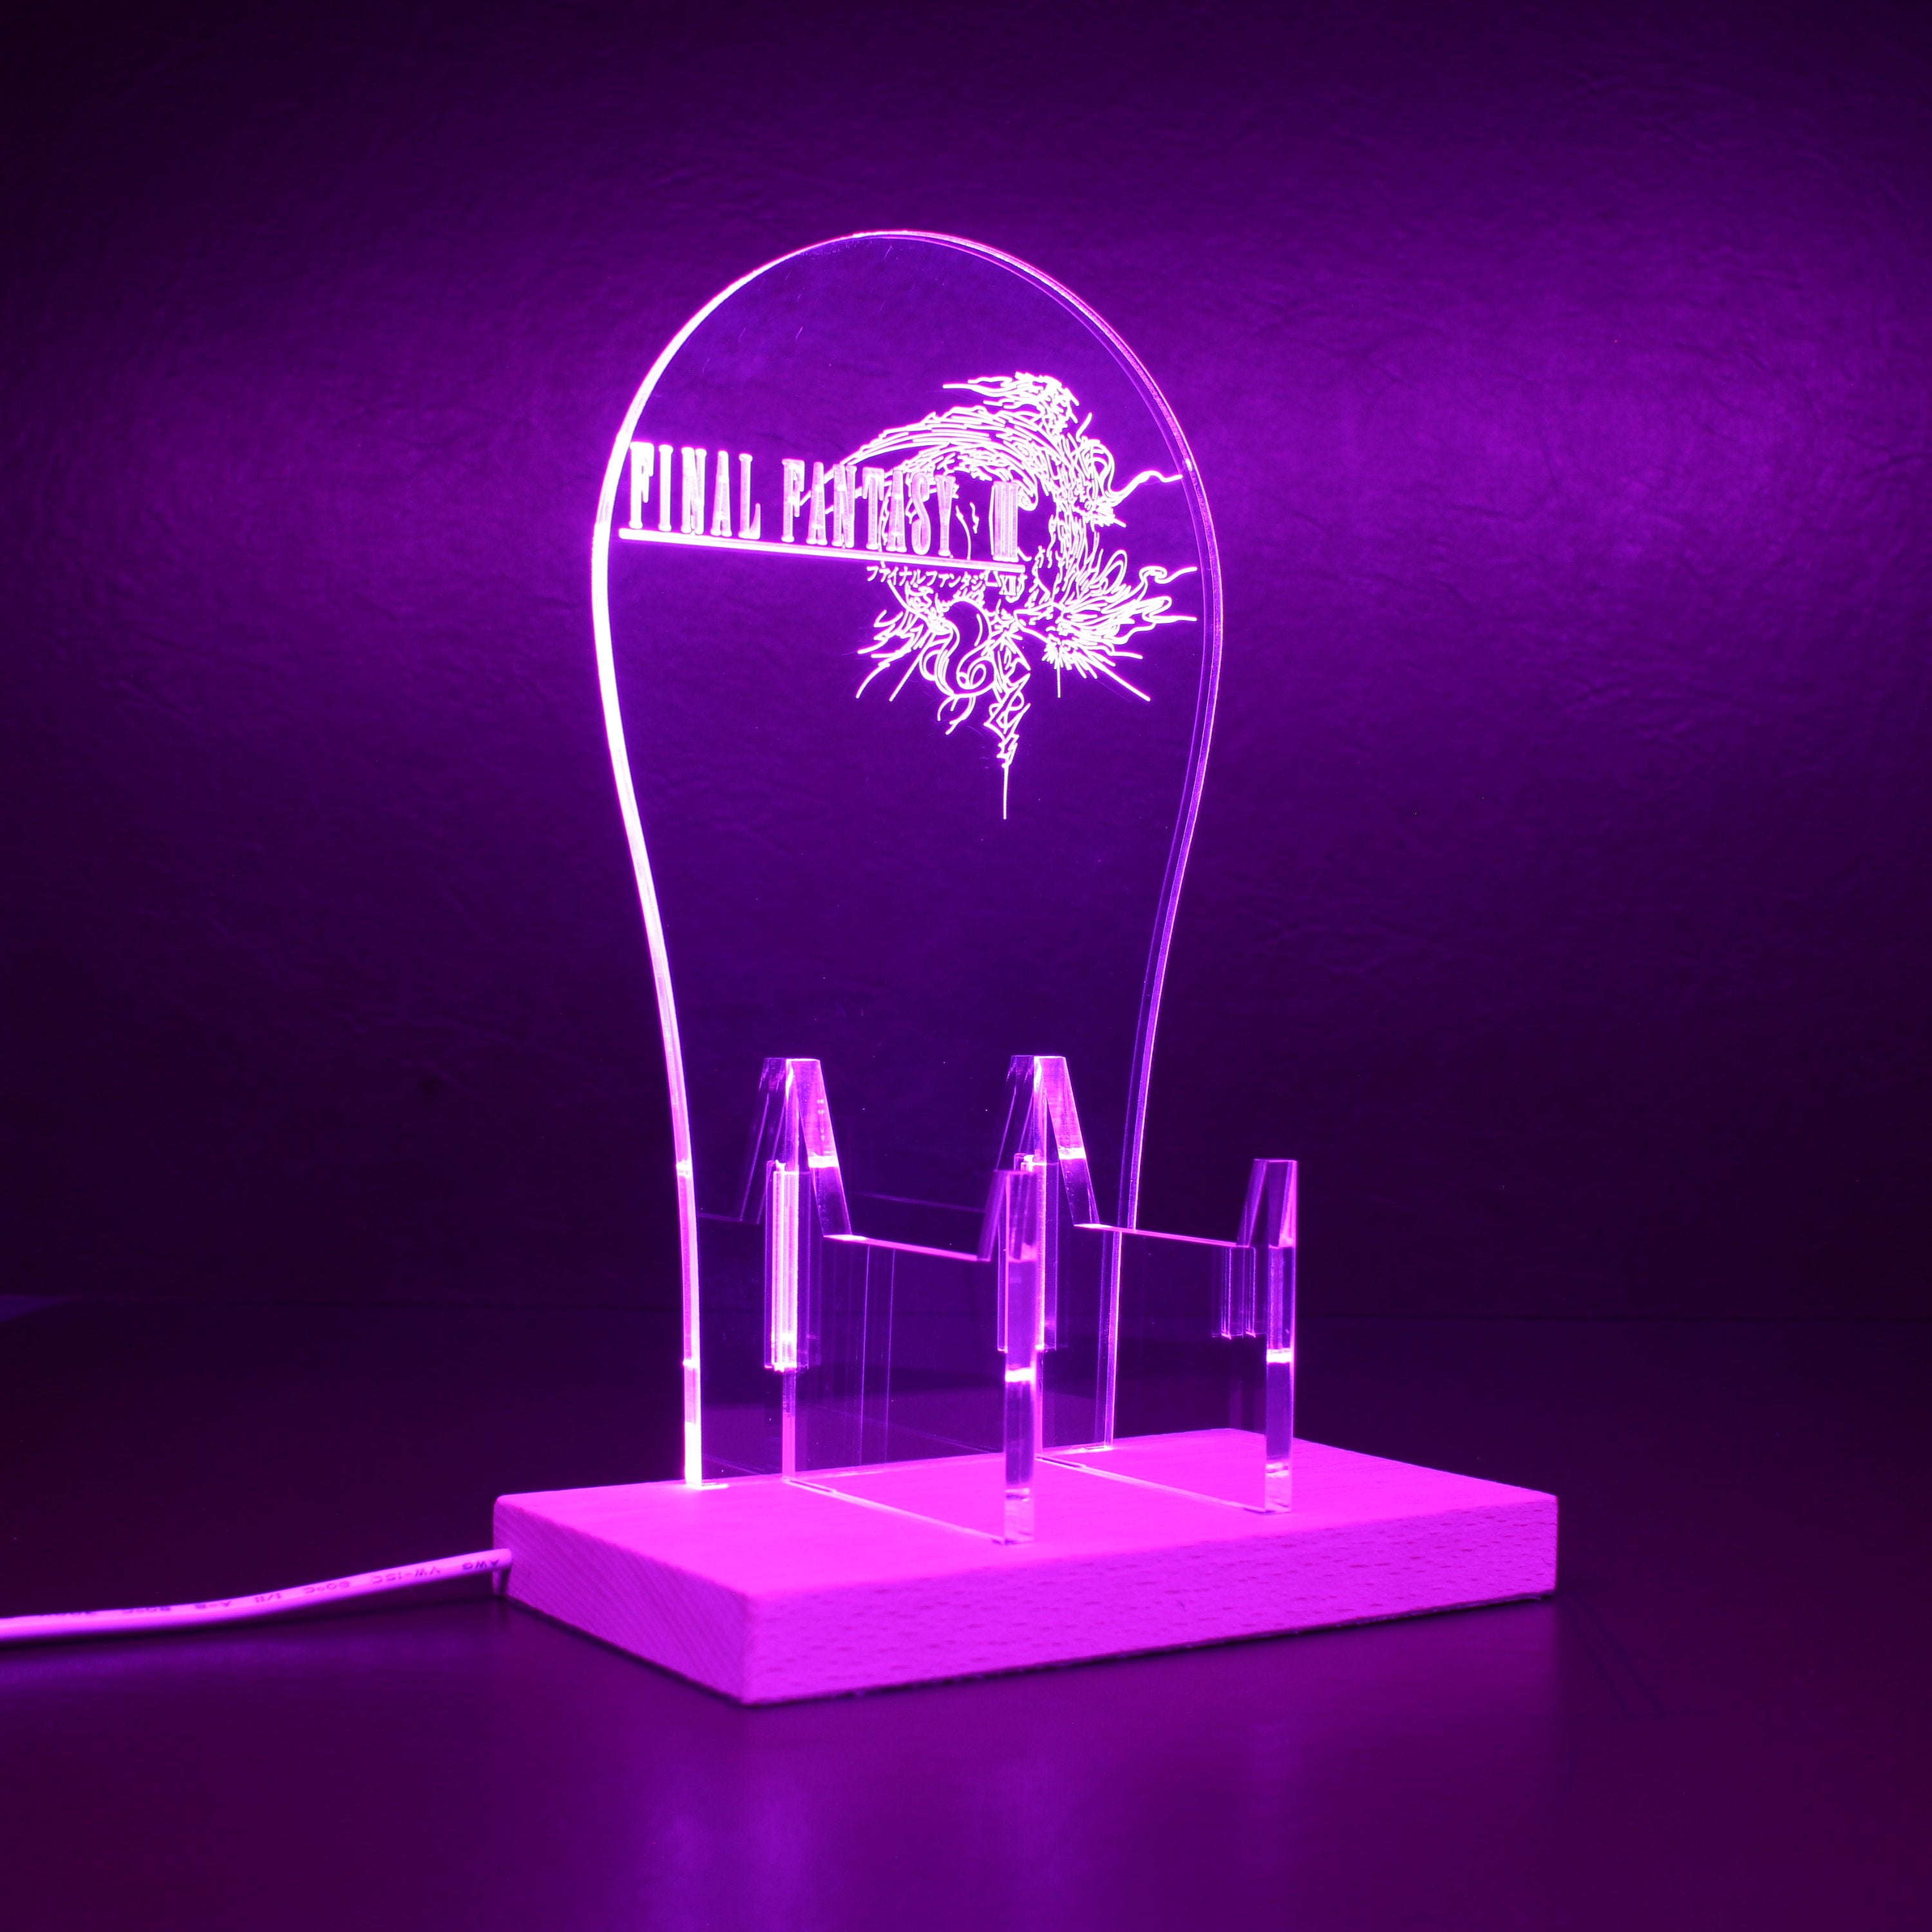 Final Fantasy 13 RGB LED Gaming Headset Controller Stand